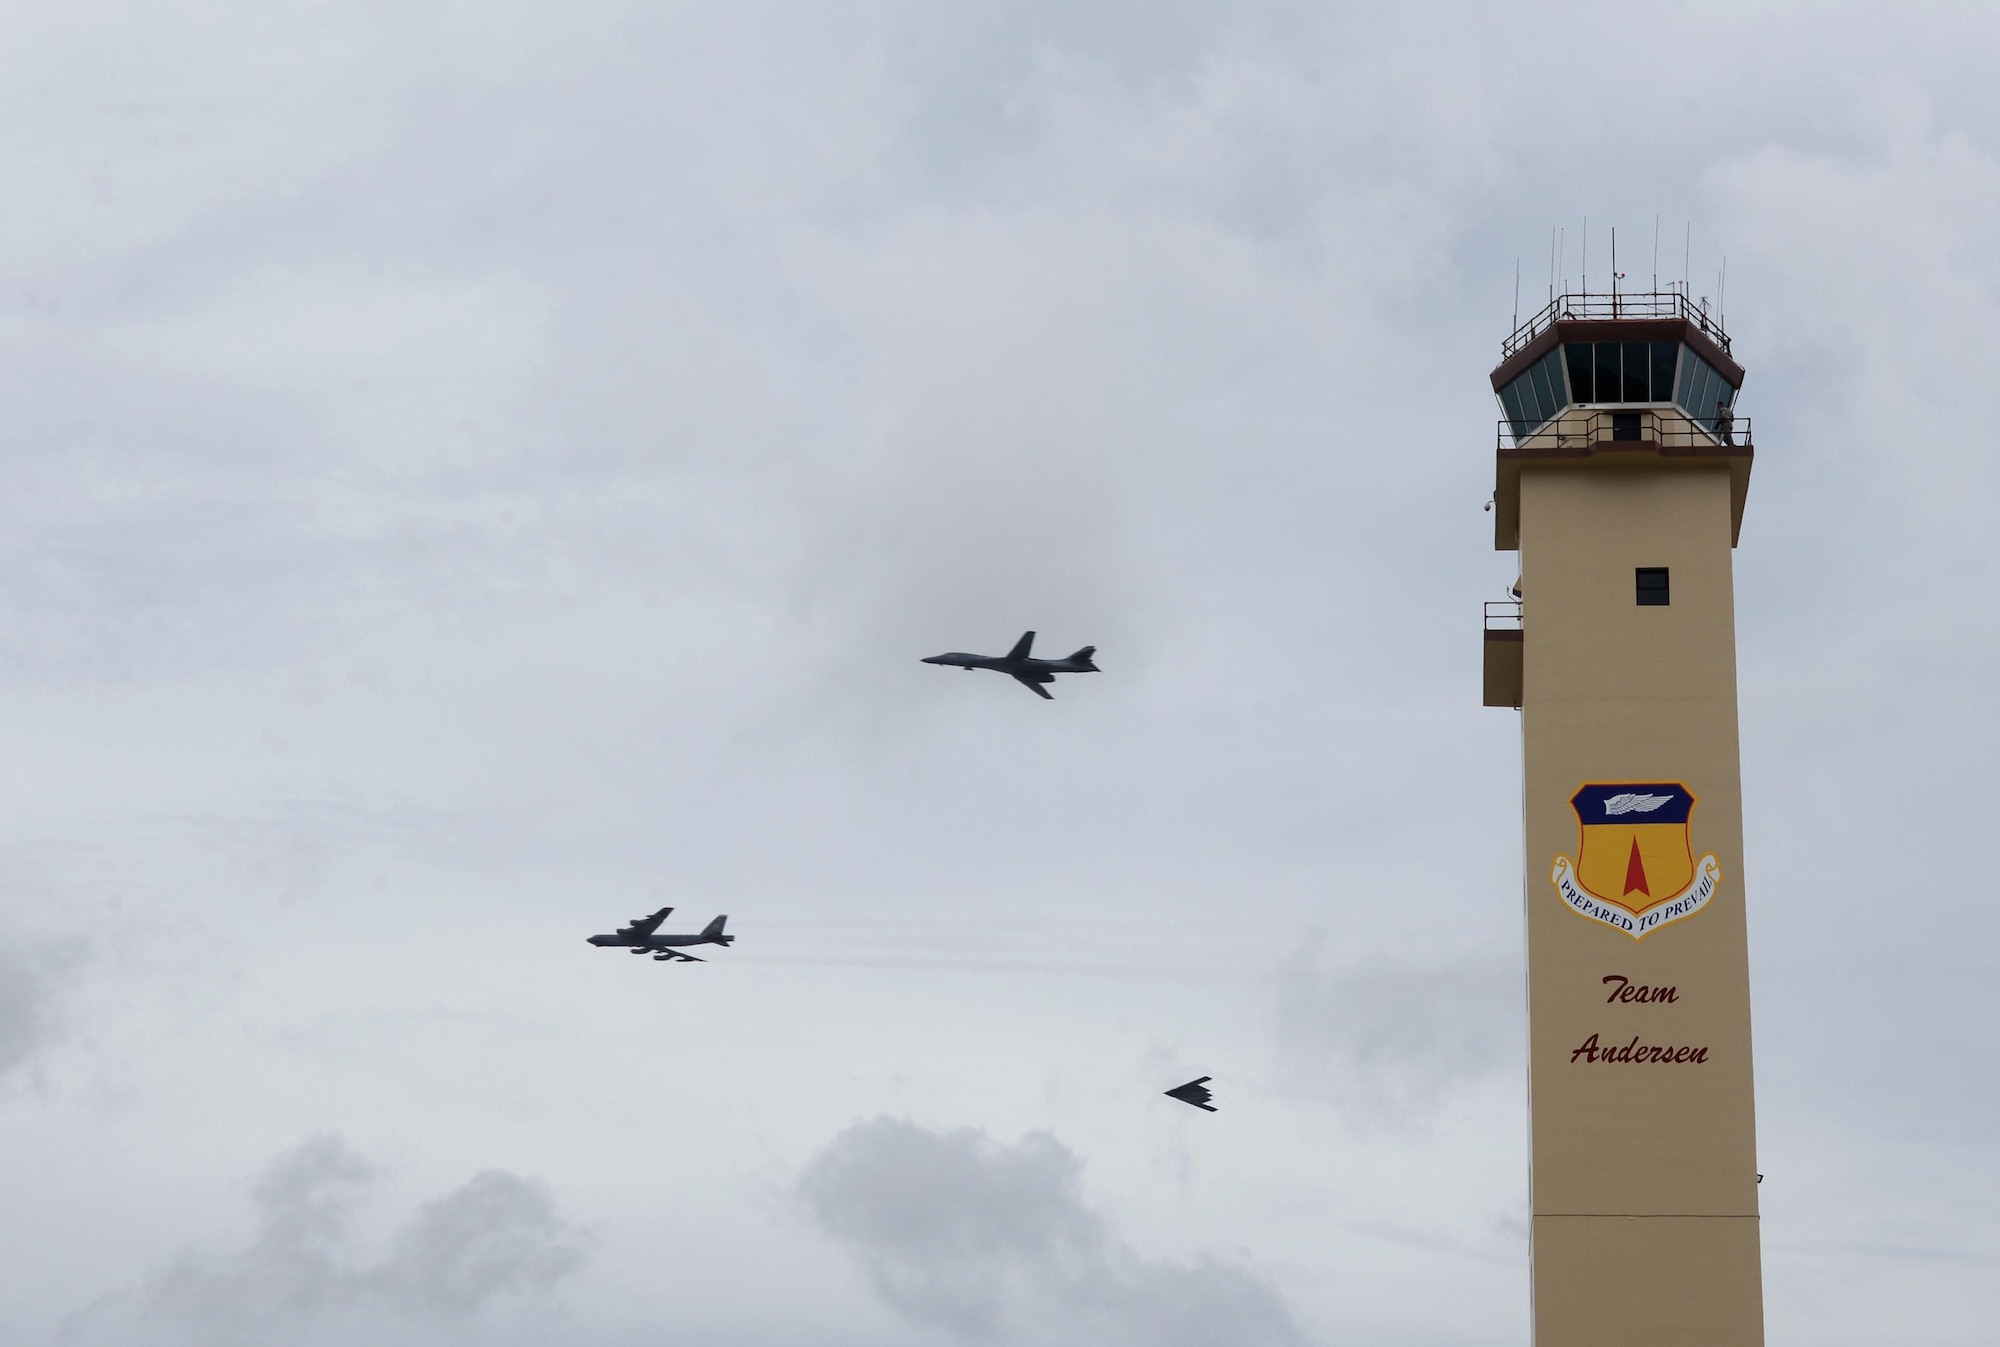 A U.S. Air Force B-52 Stratofortress, B-1 Lancer and B-2 Spirit conduct a flyover at Andersen Air Force Base, Guam, Aug.17, 2016. This marks the first time in history that all three of Air Force Global Strike Command's strategic bomber aircraft are simultaneously conducting operations in the U.S. Pacific Command area of operations. The B-1 Lancer will replace the B-52 in support of the U.S. Pacific Command Continuous Bomber Presence mission. (U.S. Air Force photo by Staff Sgt. Benjamin Gonsier)